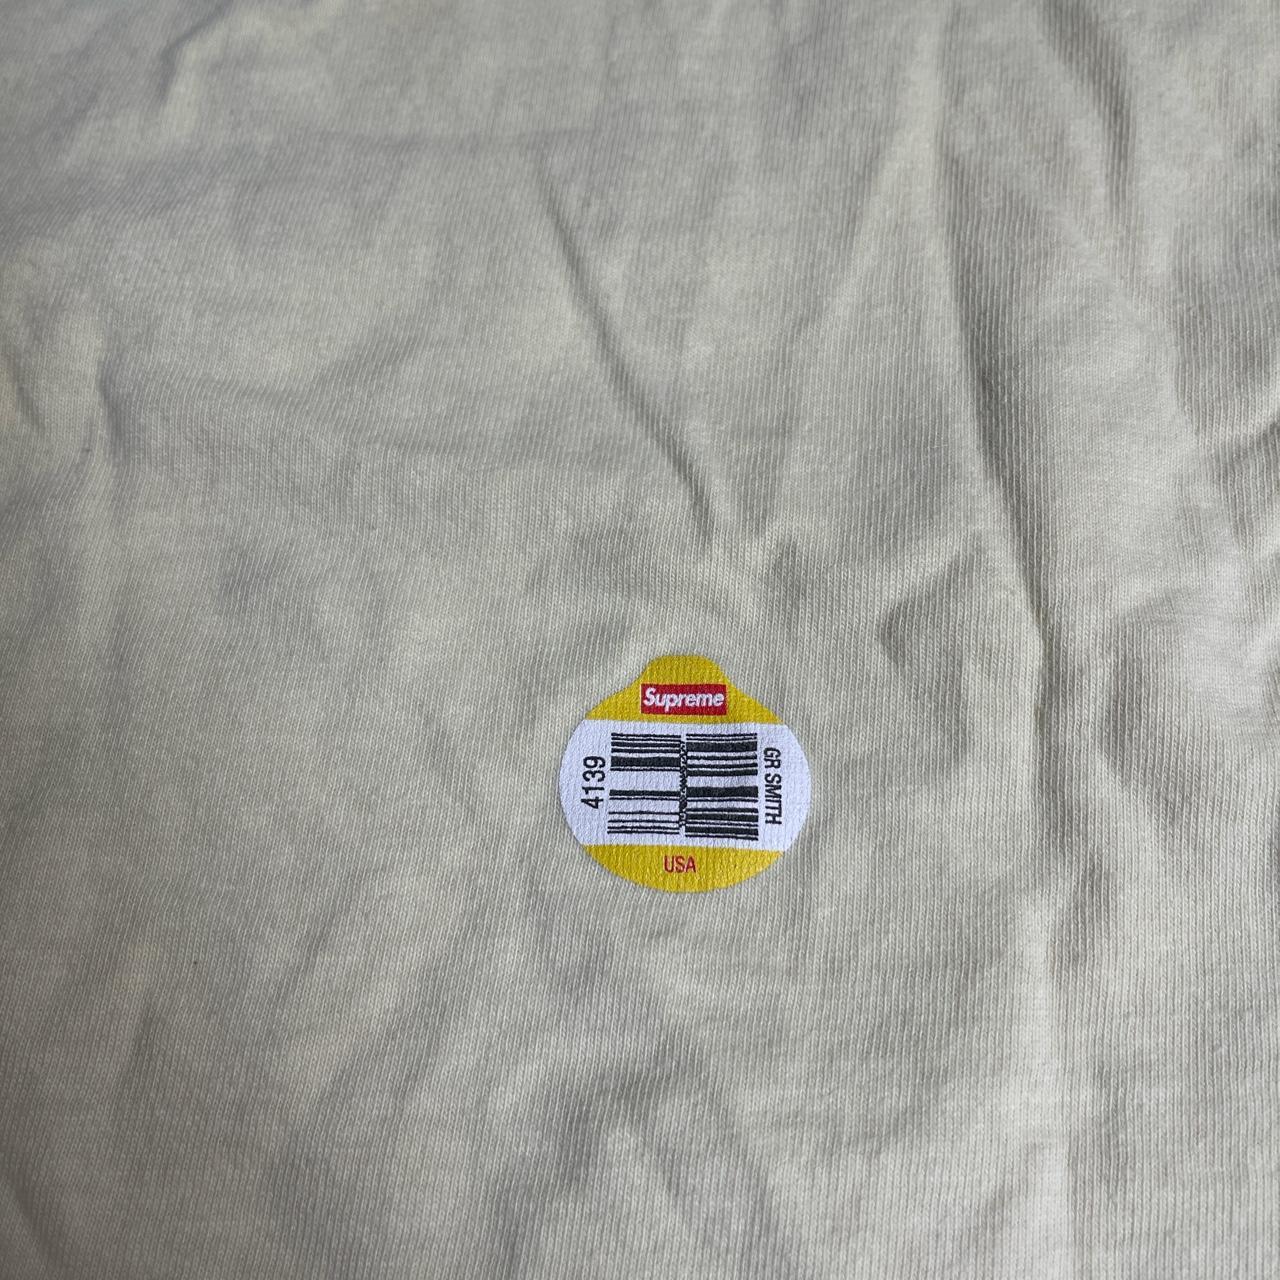 Supreme Yellow Fruit Tee. Size Small. Condition as... - Depop